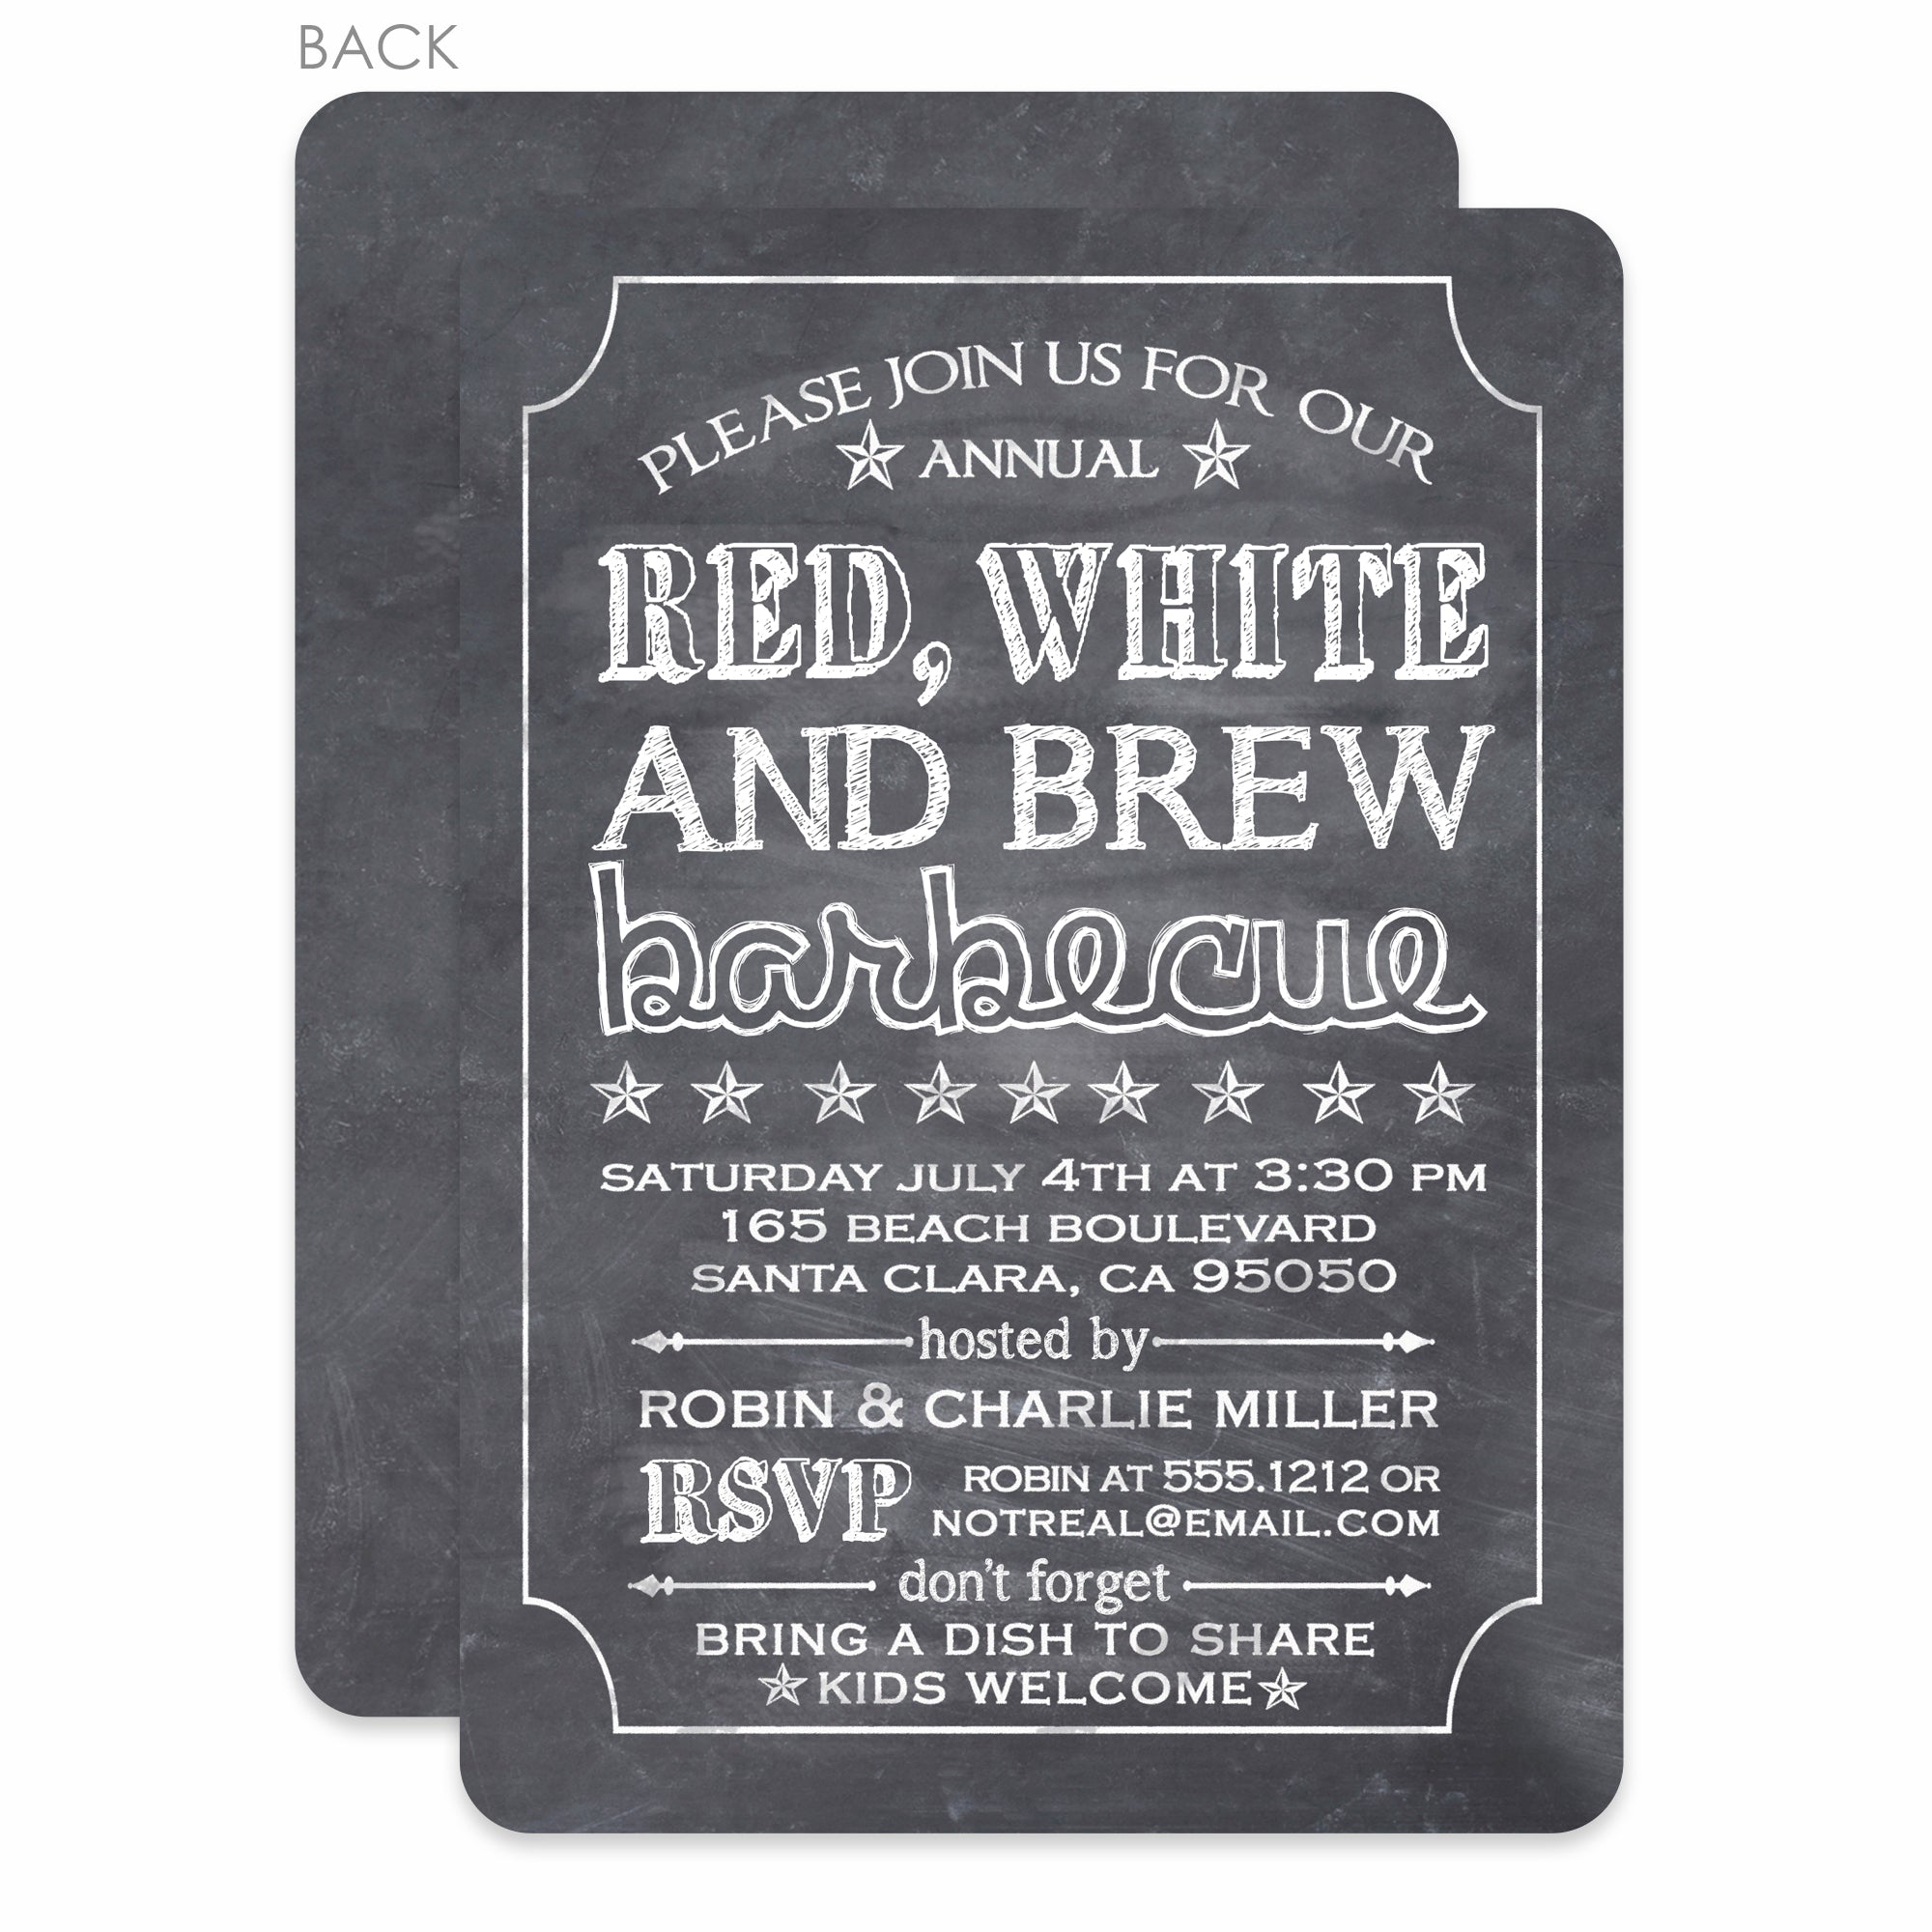 4th of July Invitation, Chalkboard, Red, White and Brew, PIPSY.COM